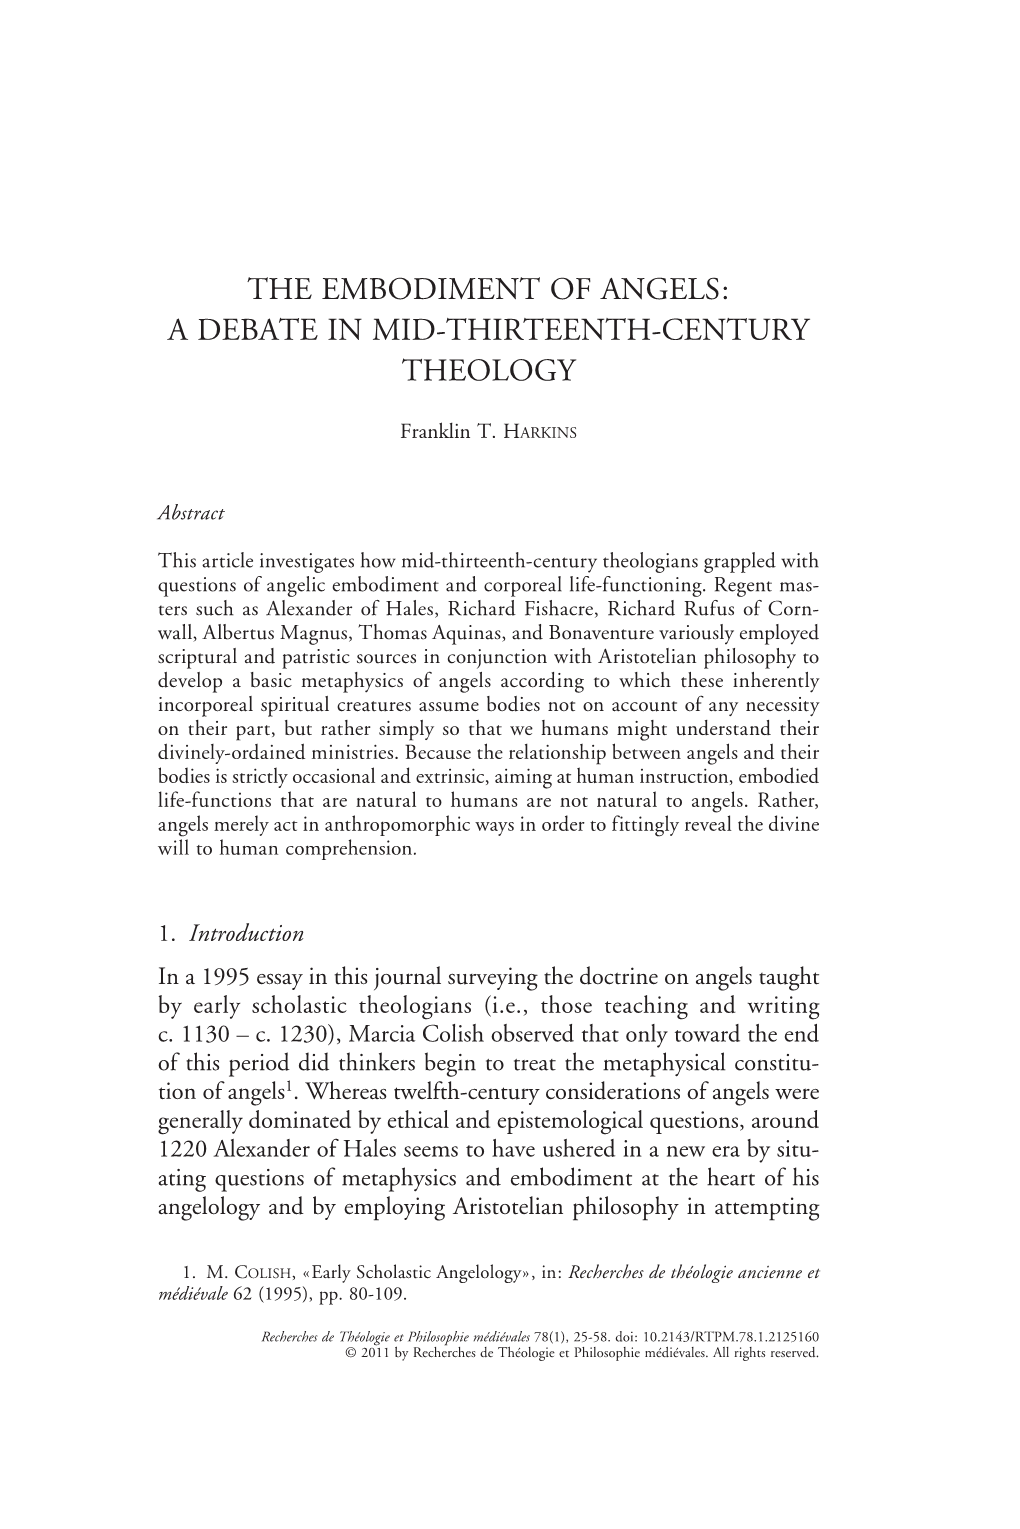 The Embodiment of Angels: a Debate in Mid-Thirteenth-Century Theology